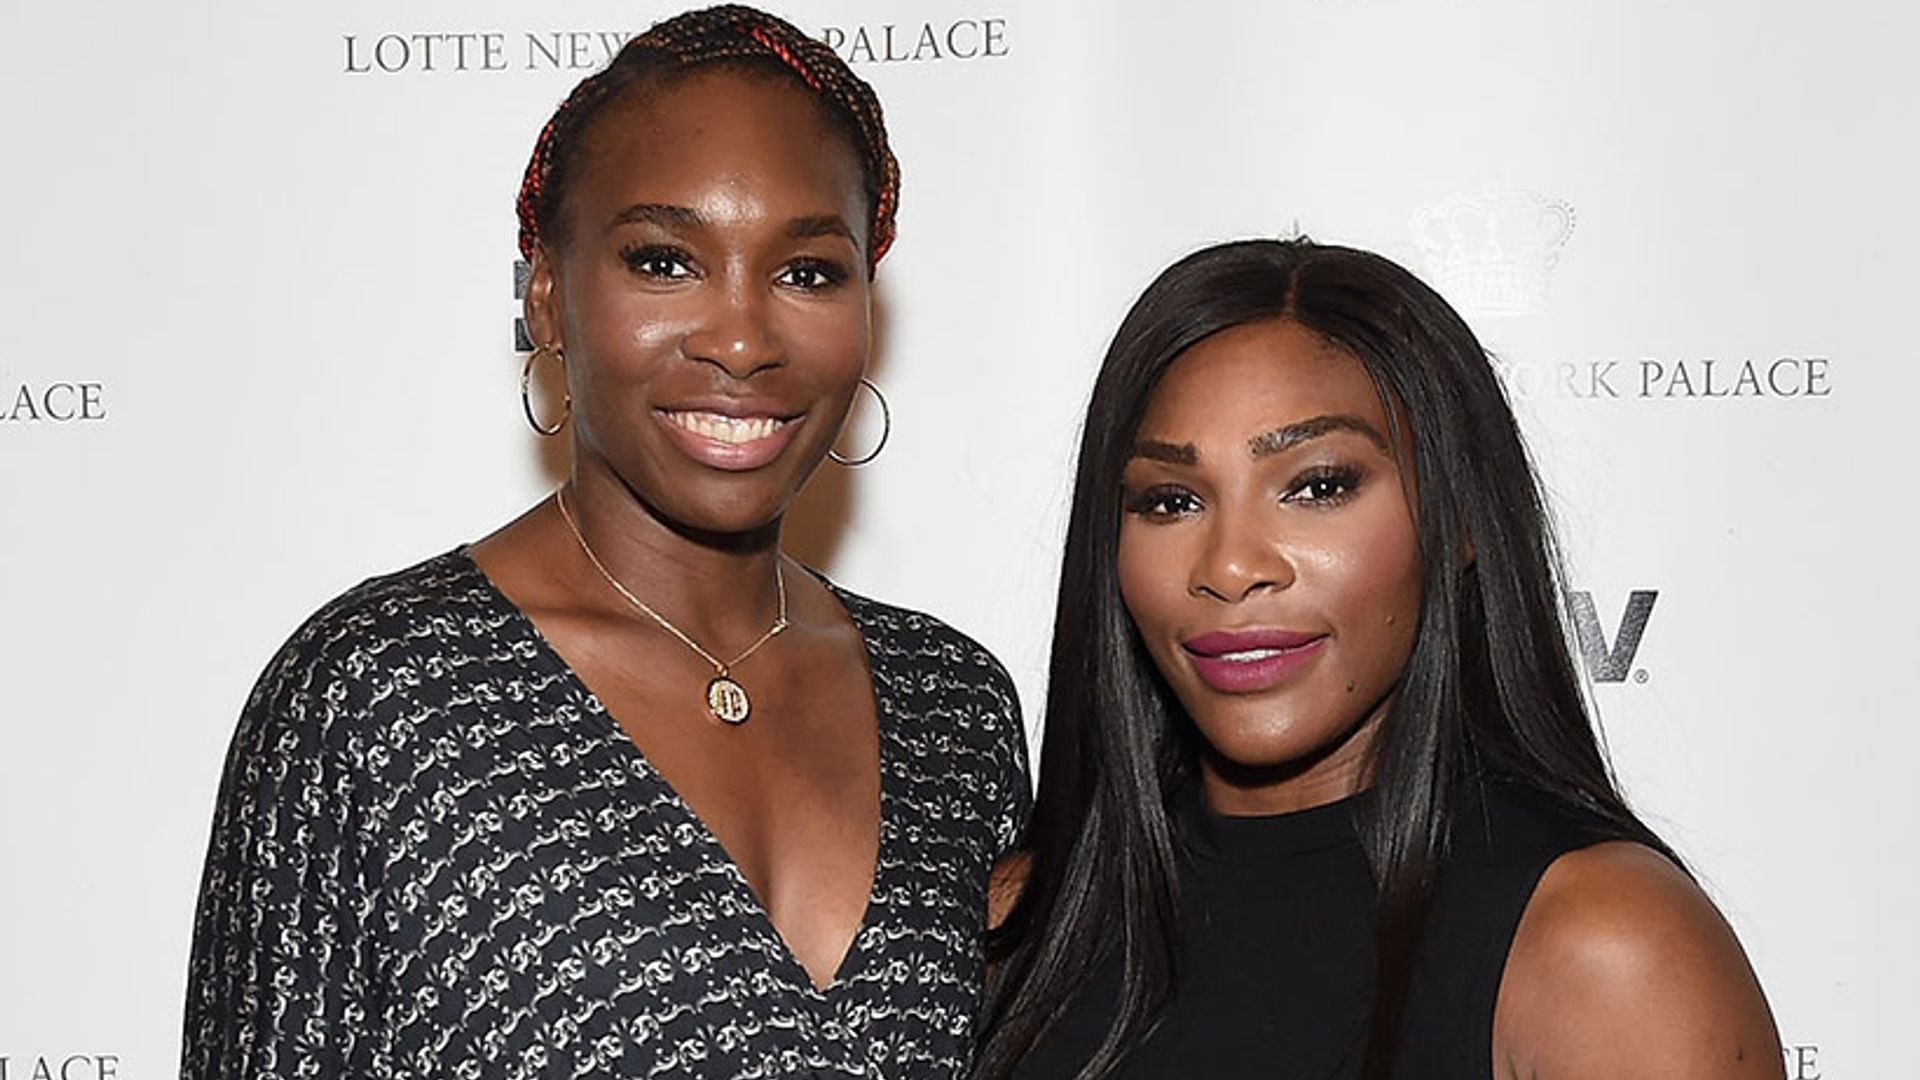 Serena Williams pays touching tribute to sister Venus ahead of Wimbledon